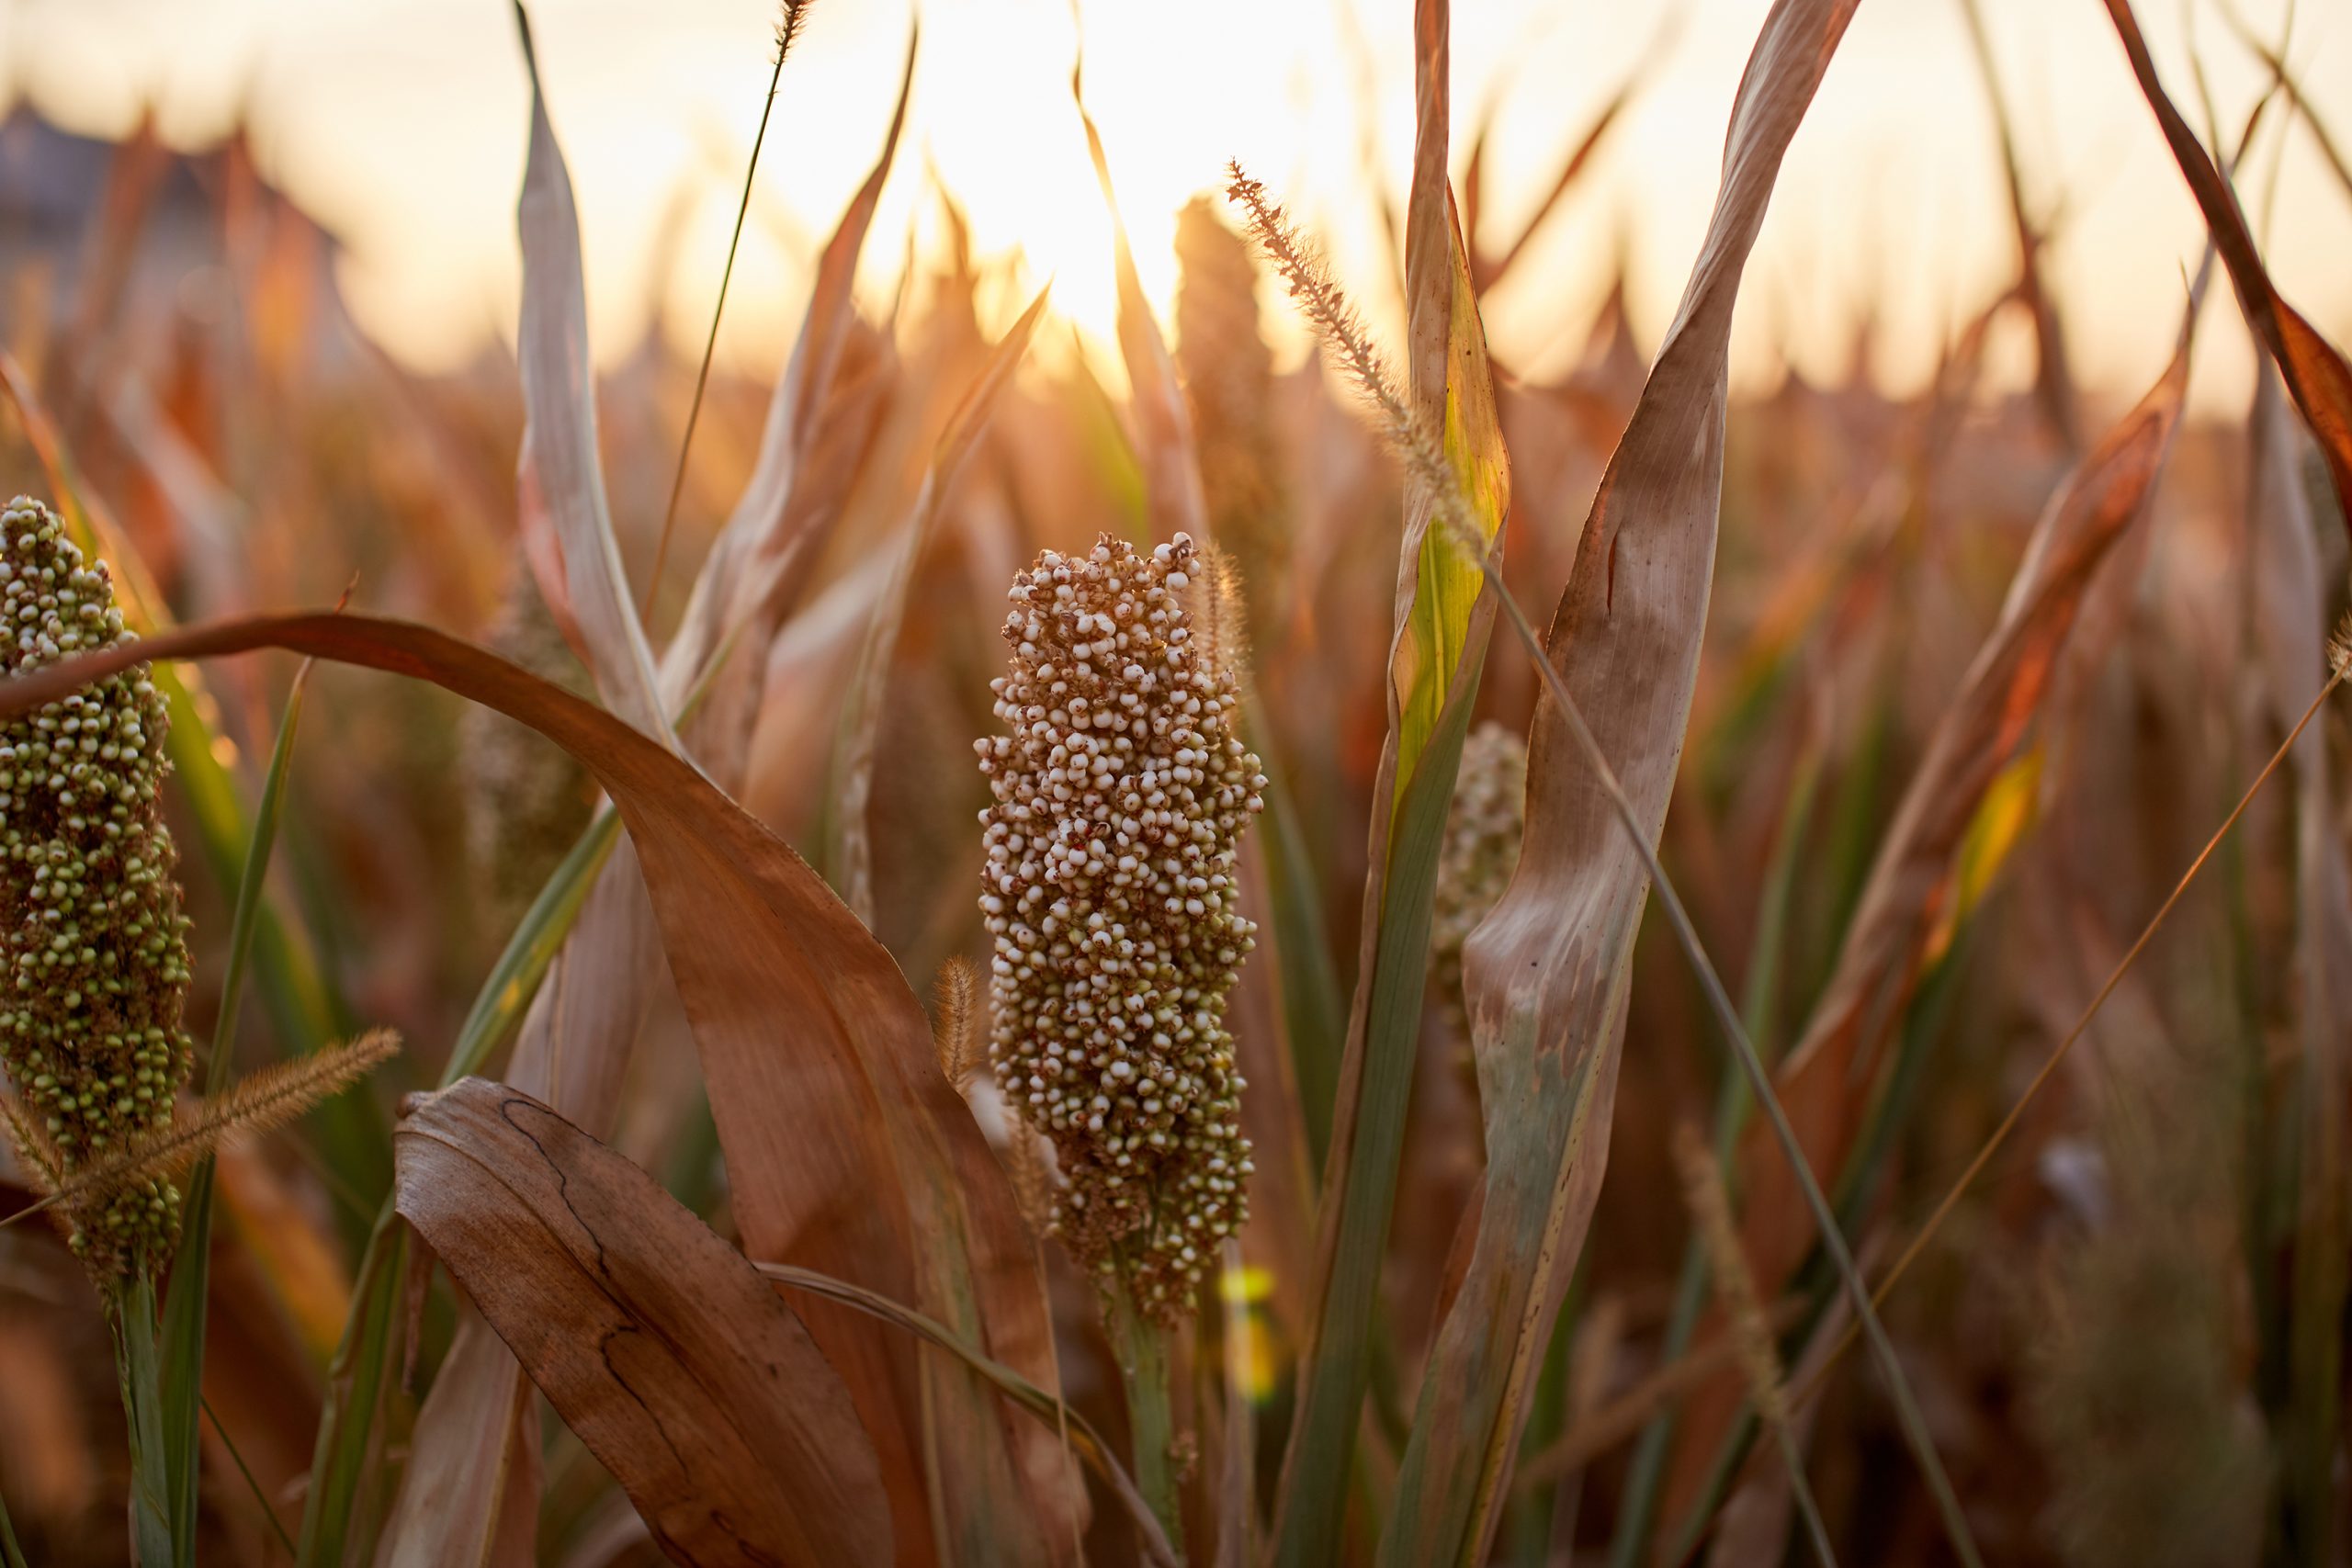 Ripe,Sorghum,Swing,In,A,Field,At,Sunset.,Selective,Focus